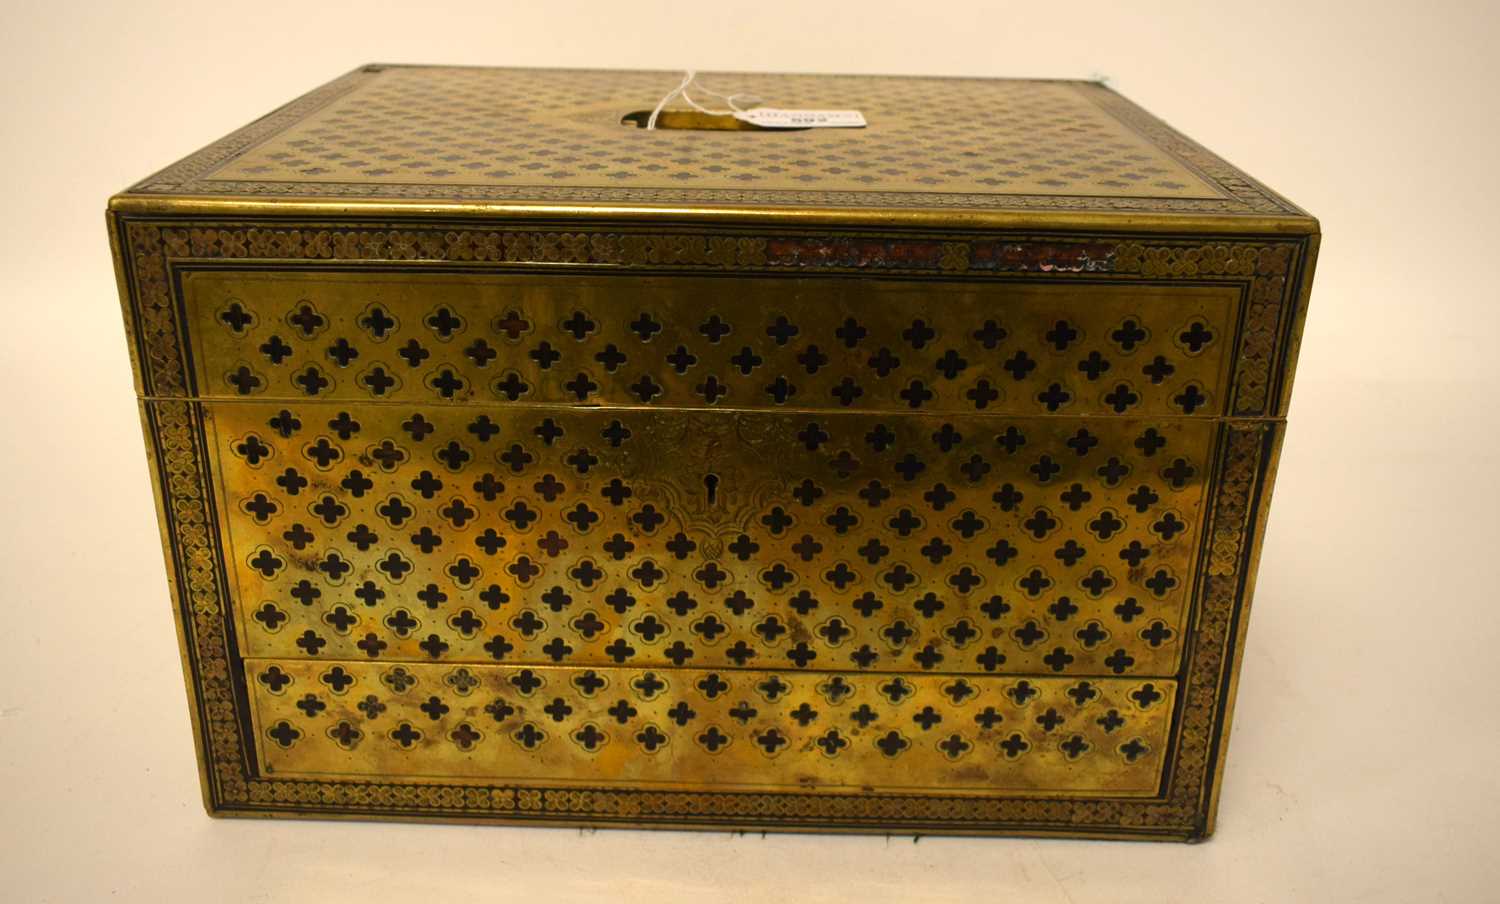 A FINE EARLY 19TH CENTURY FRENCH BRONZE OVERLAID WOOD CASKET with fully fitted silver interior, - Image 12 of 23